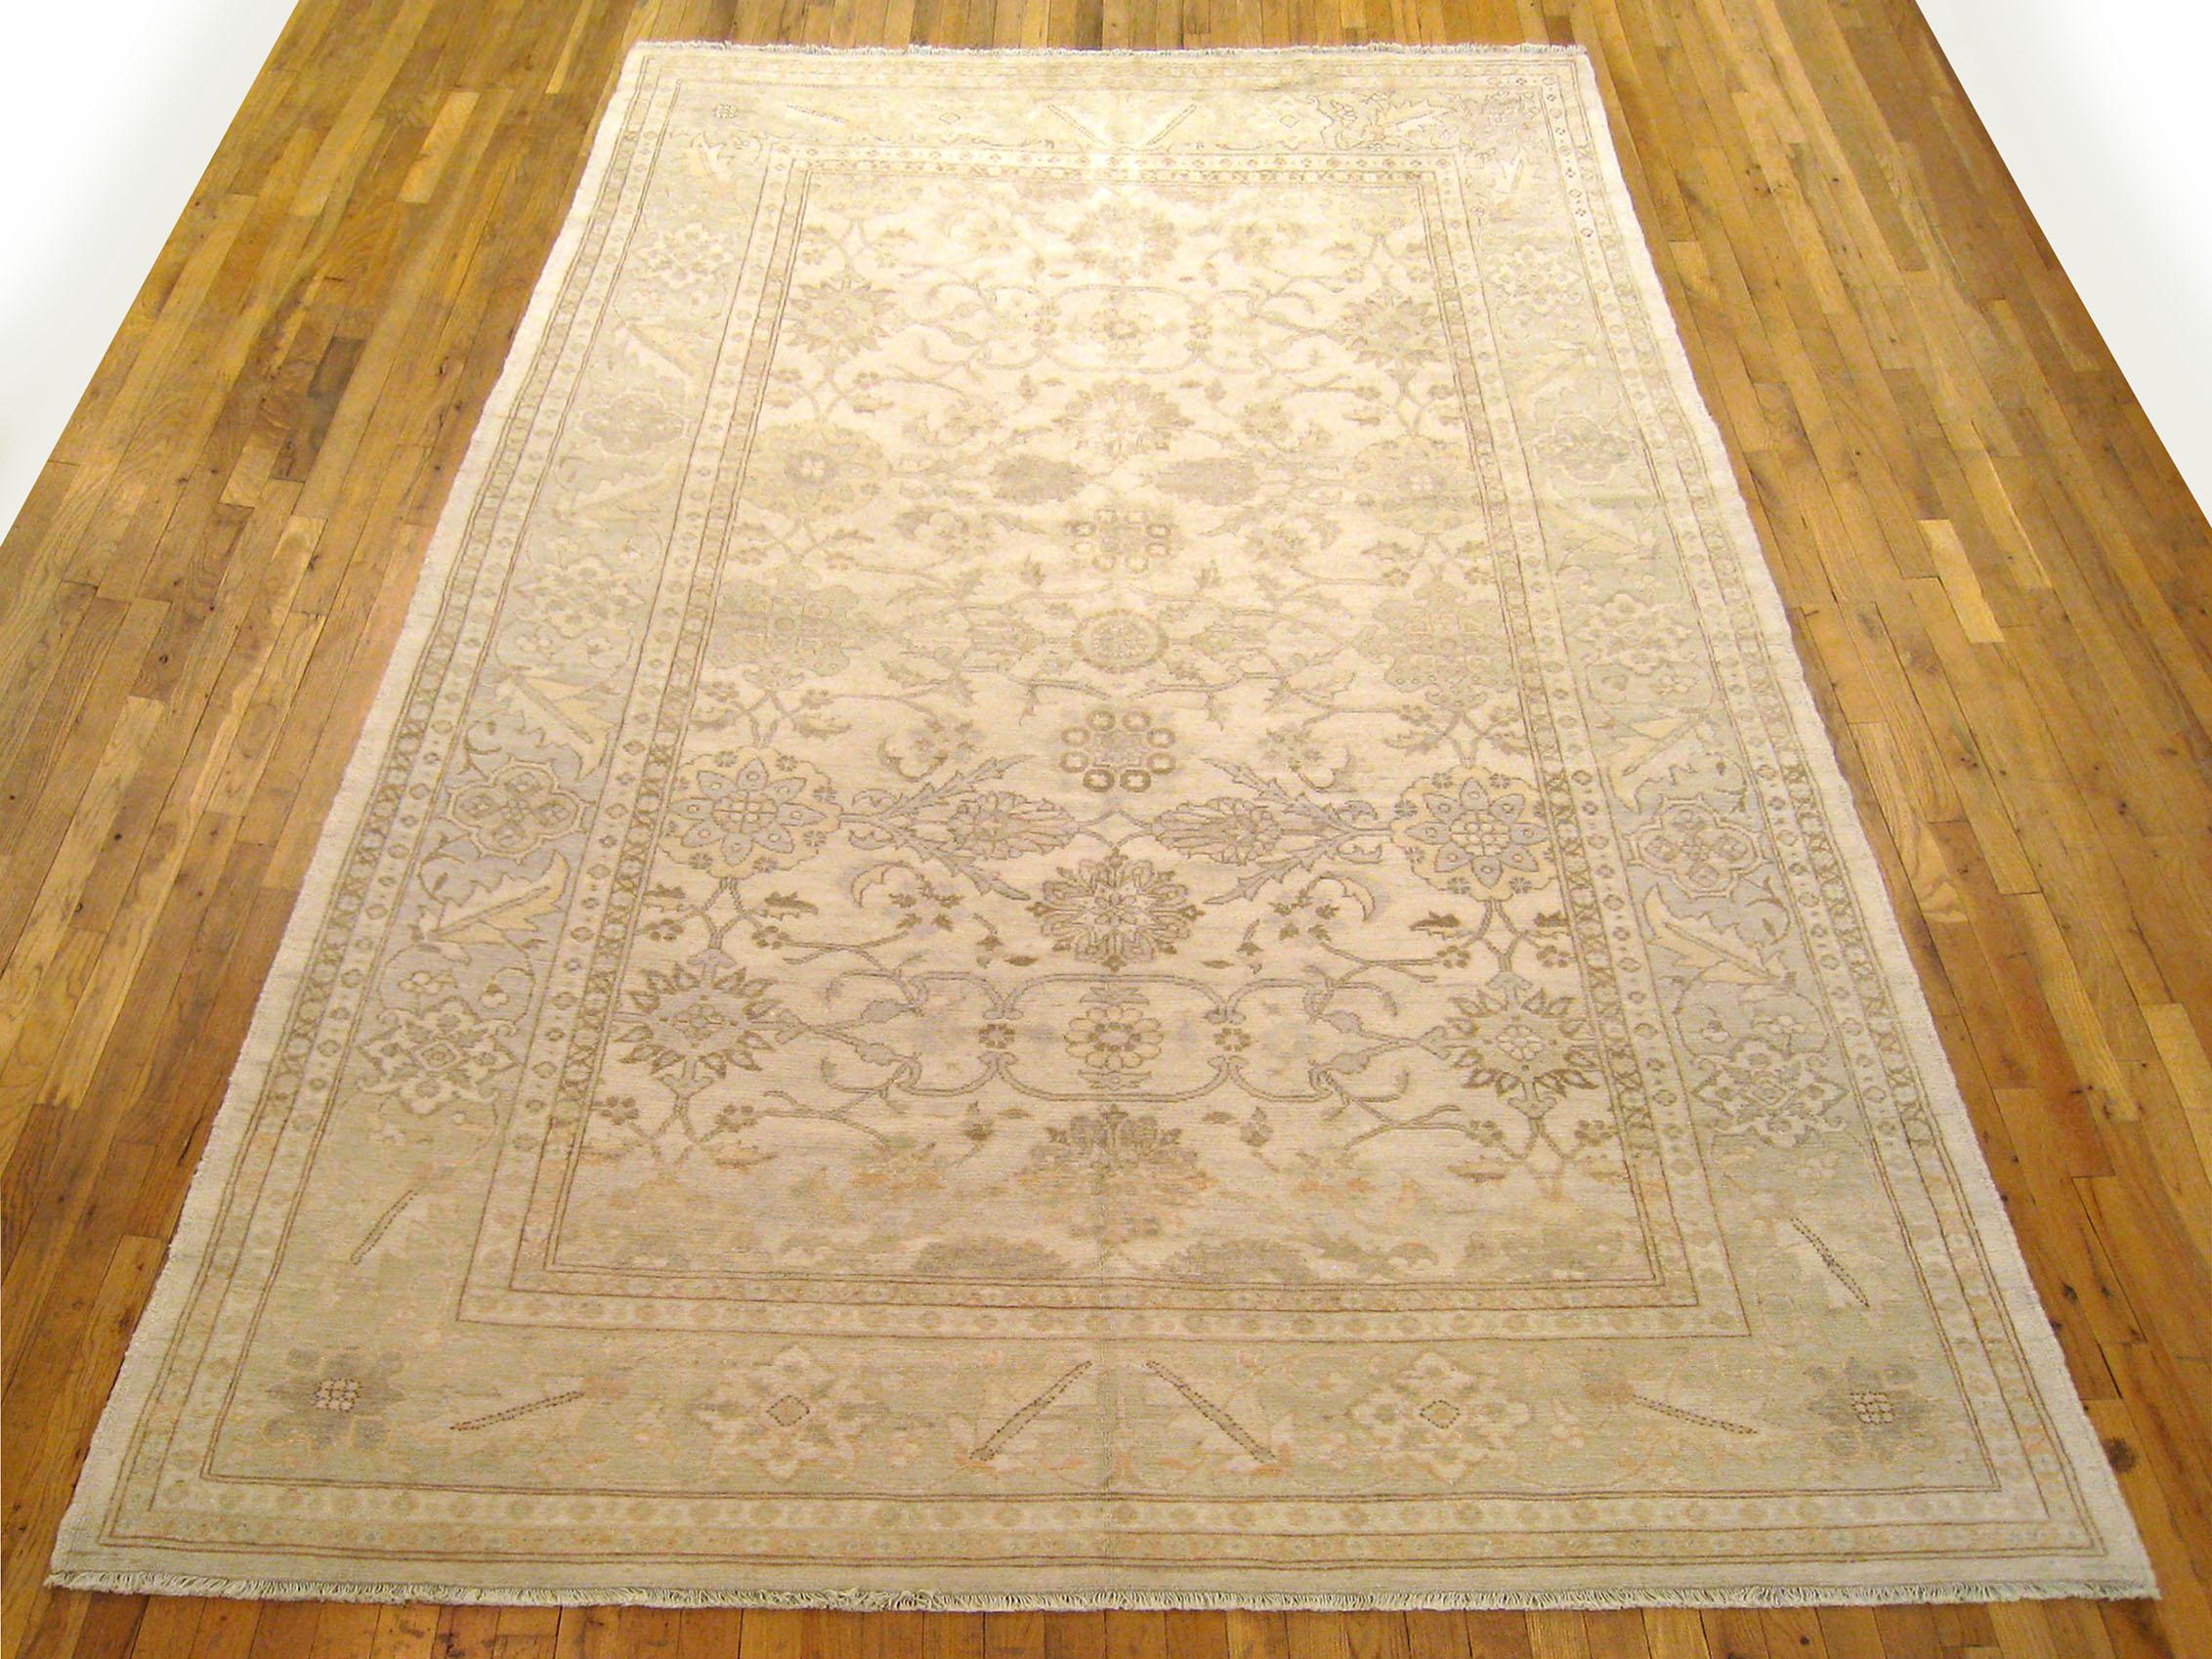 Vintage Persian Sultanabad rug, Room size, circa 1960

A one-of-a-kind vintage Persian Sultanabad oriental carpet with a thick and lustrous wool pile, knotted by hand, with soft touch and great resistance to wear. This carpet features palmettes